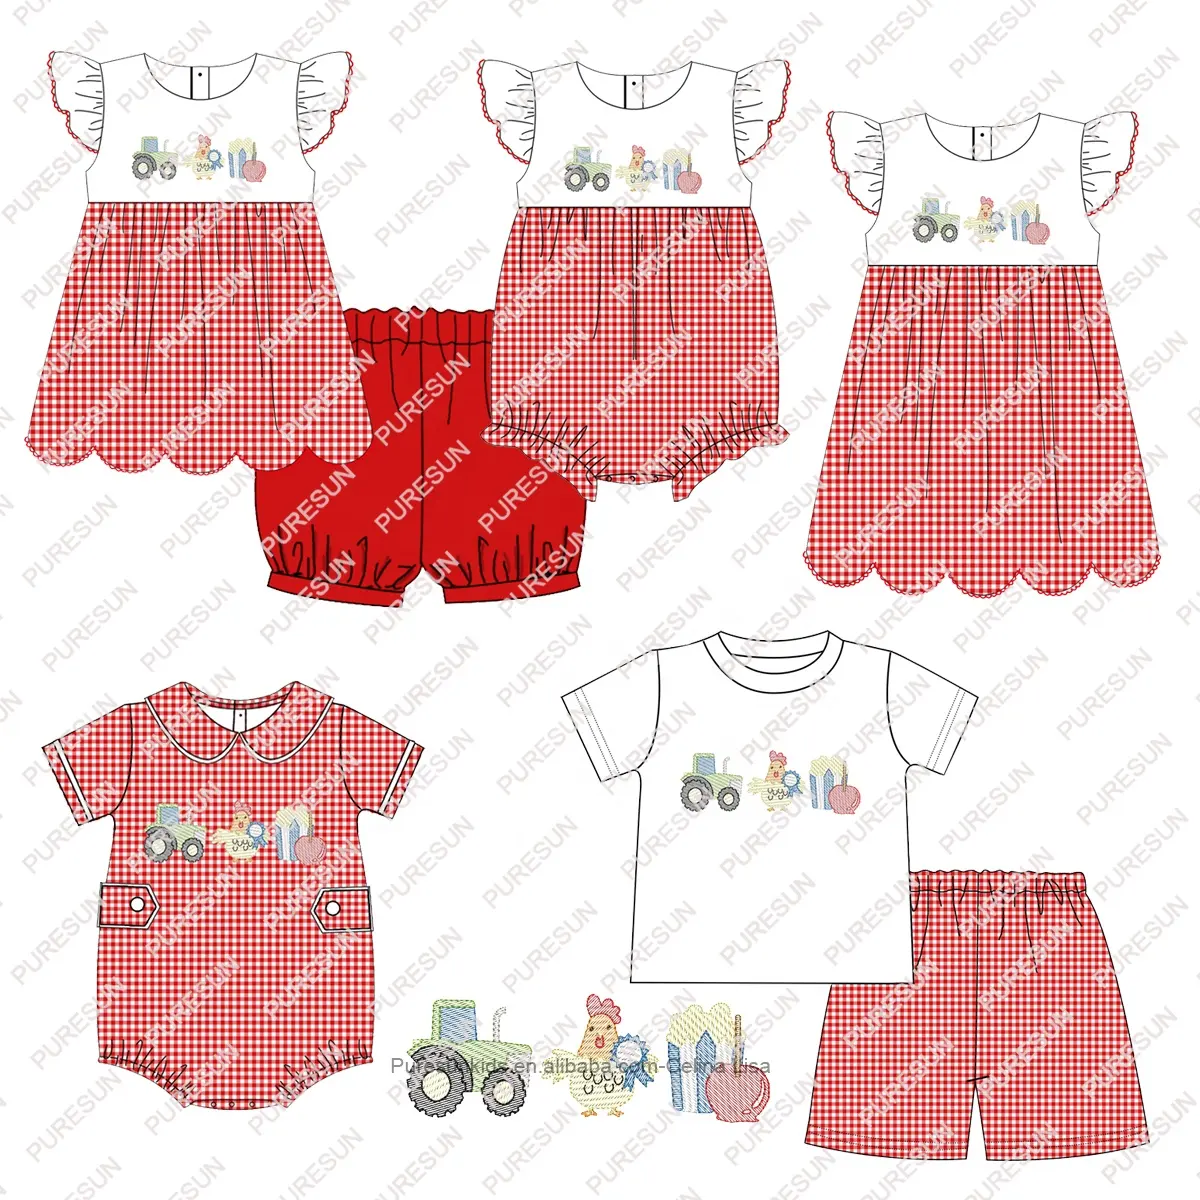 Puresun new design toddler girl outfit farm embroidery girl summer clothes wholesale newborn little girls clothing sets